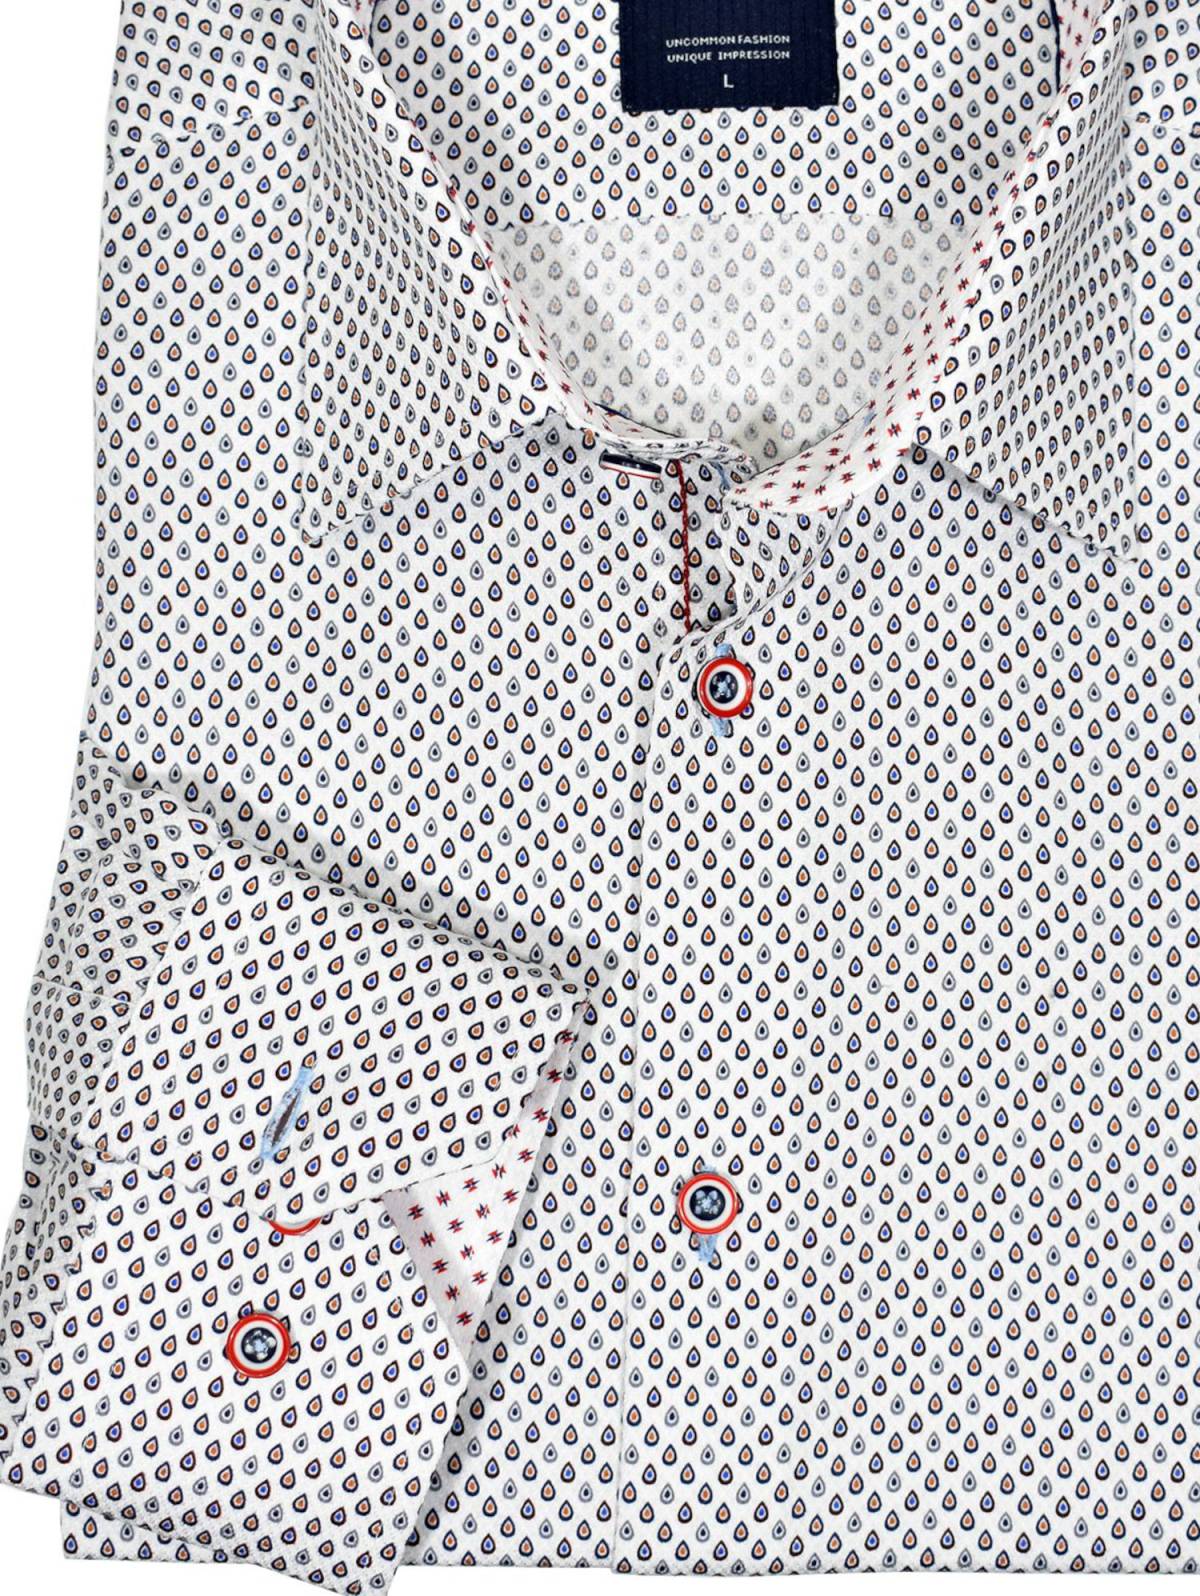 The Marcello exclusive 1 piece roll collar will look significantly better than your normal shirts. Incredible easy care, herringbone fabric feels extra fine and performs well all day.   The cotton fabric with microfiber has a clean teardrop pattern in easy complimentary colors.   Hand selected buttons, contrast stitch detailing and a medium collar. Second cuff placket button for the perfect cuff turn up.  Classic shaped fit, best for a medium build.